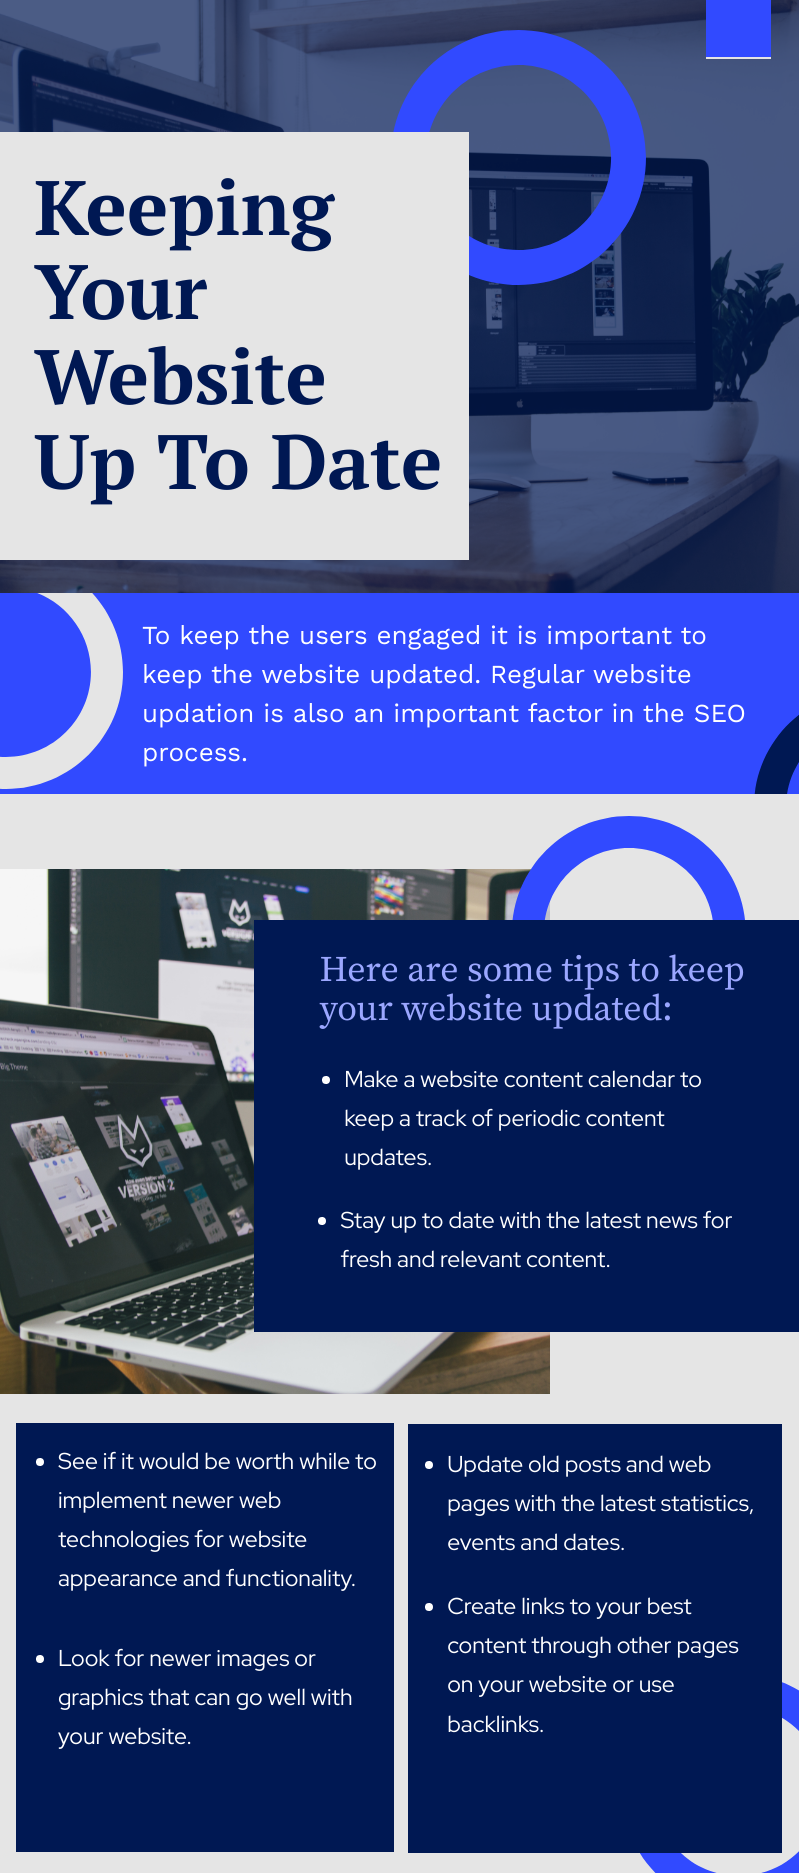 Keeping-Your-Website-Up-To-Date